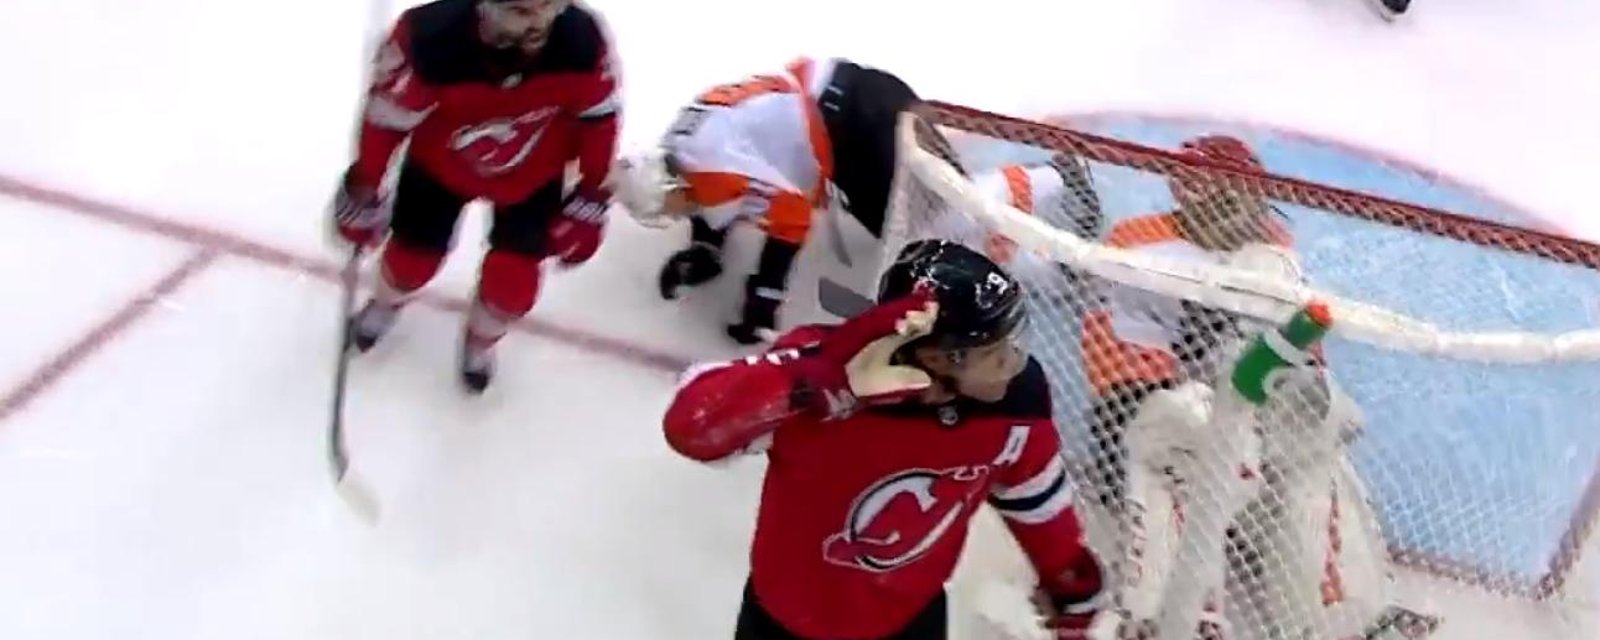 Taylor Hall taunts his own fans after scoring in New Jersey 